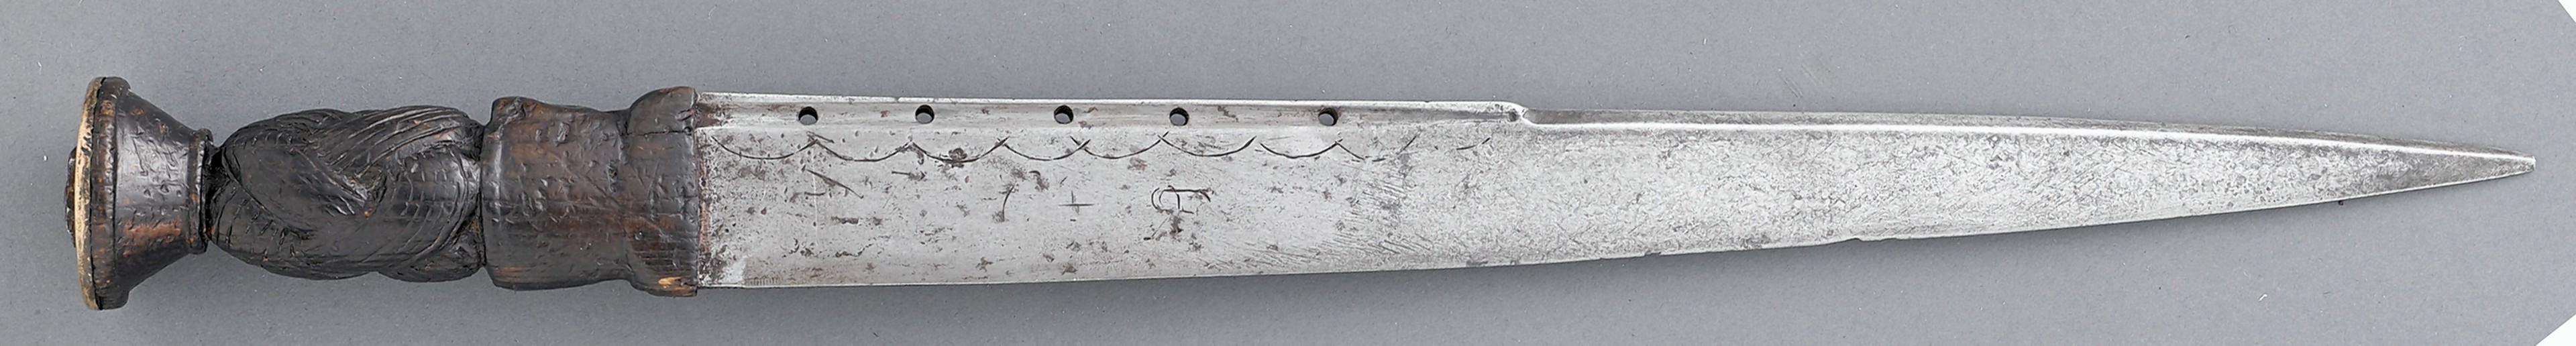 The dirk associated with Simon Fraser has been sold in the US for £2,622